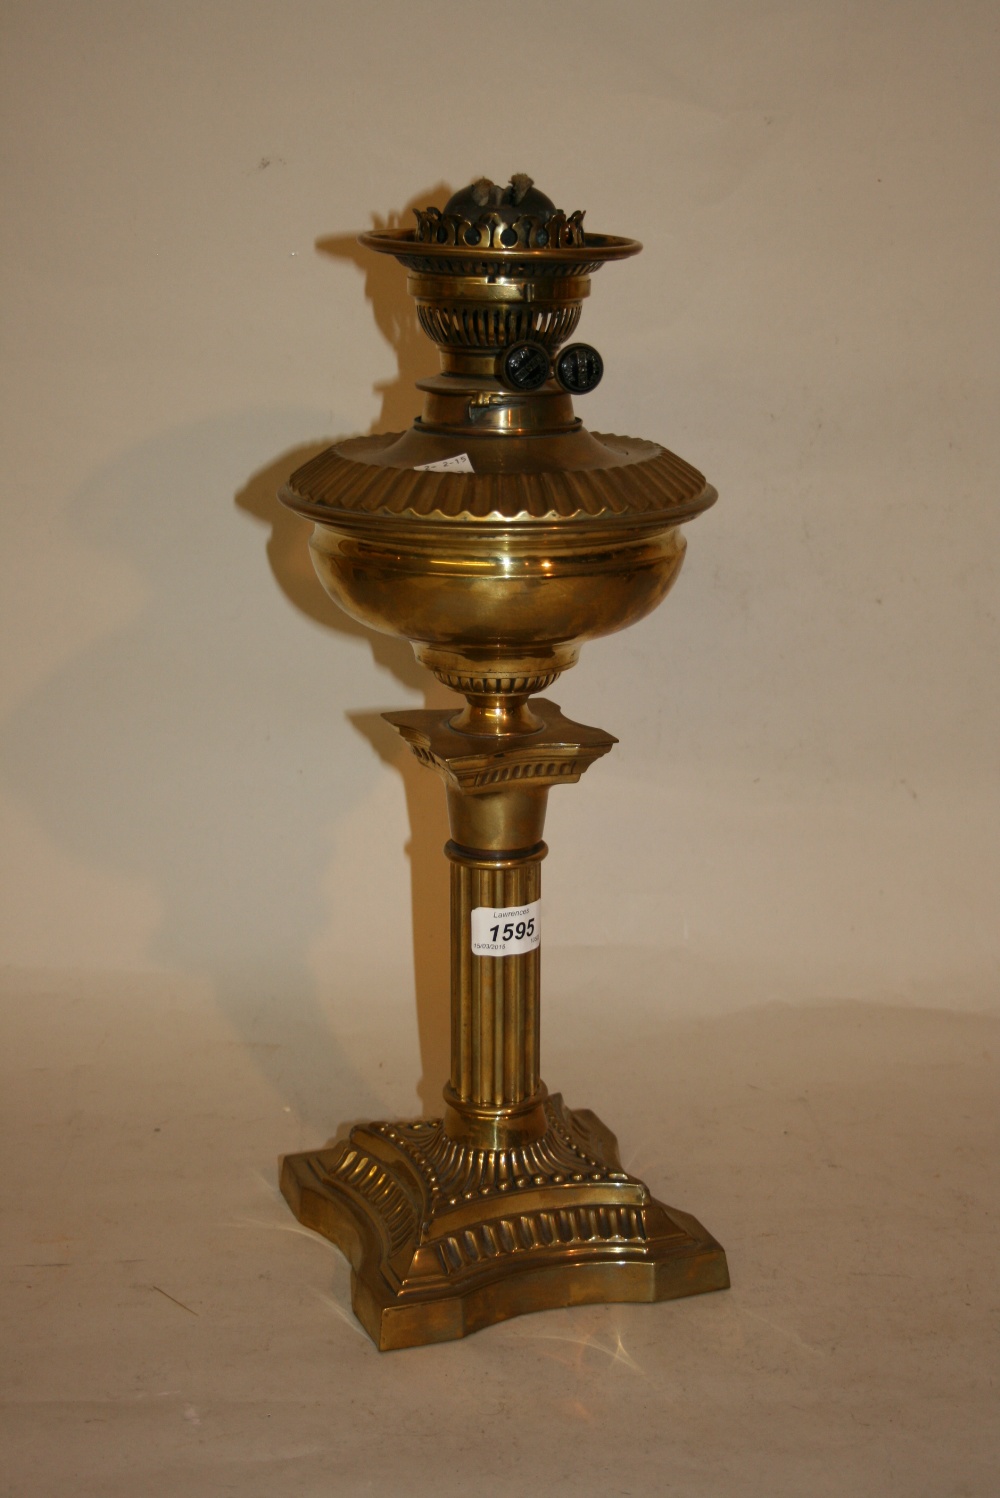 Late 19th or early 20th Century brass oil lamp and well with clear glass shade and chimney